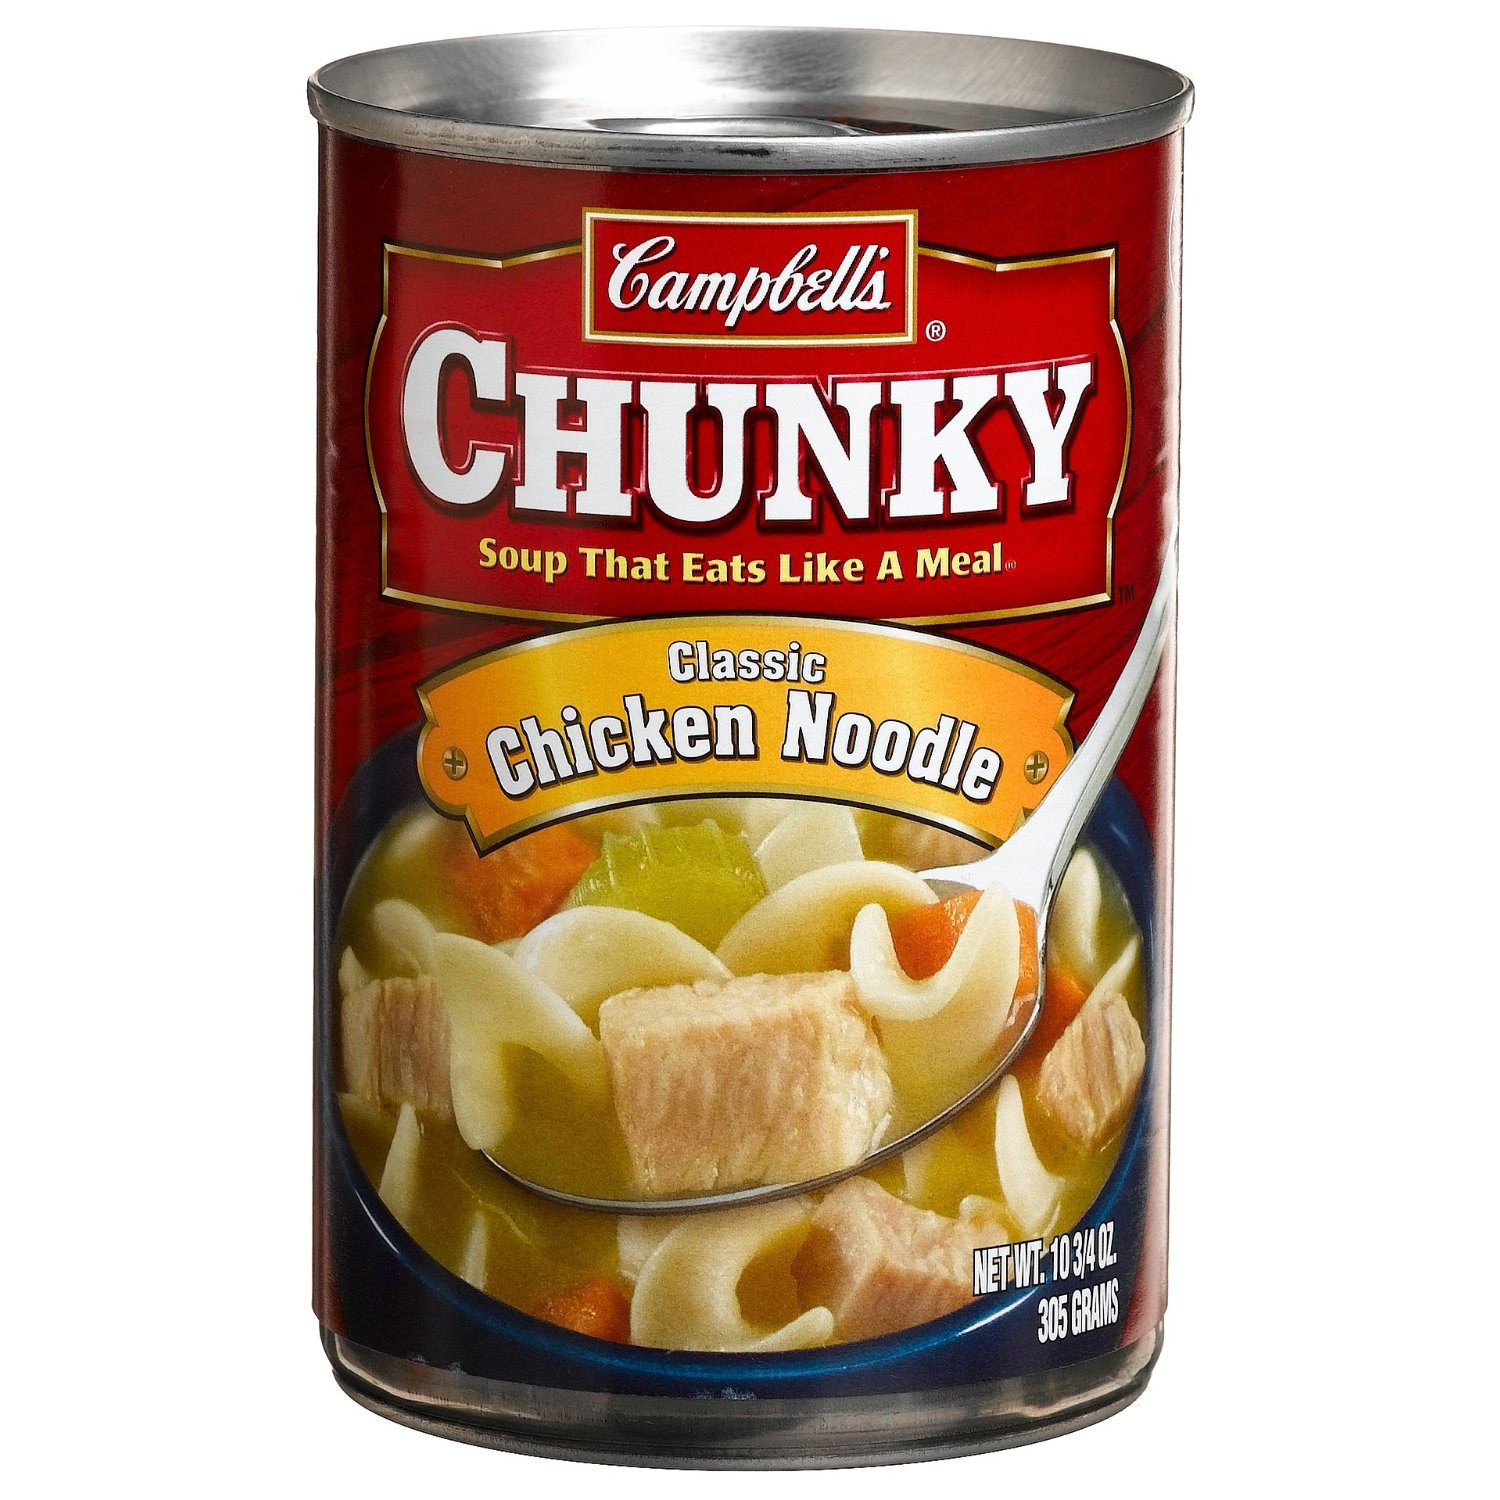 Campbells Chicken Noodle Soup
 CANNED GOODS SOUP PREPARED MEALS Campbell s Chunky